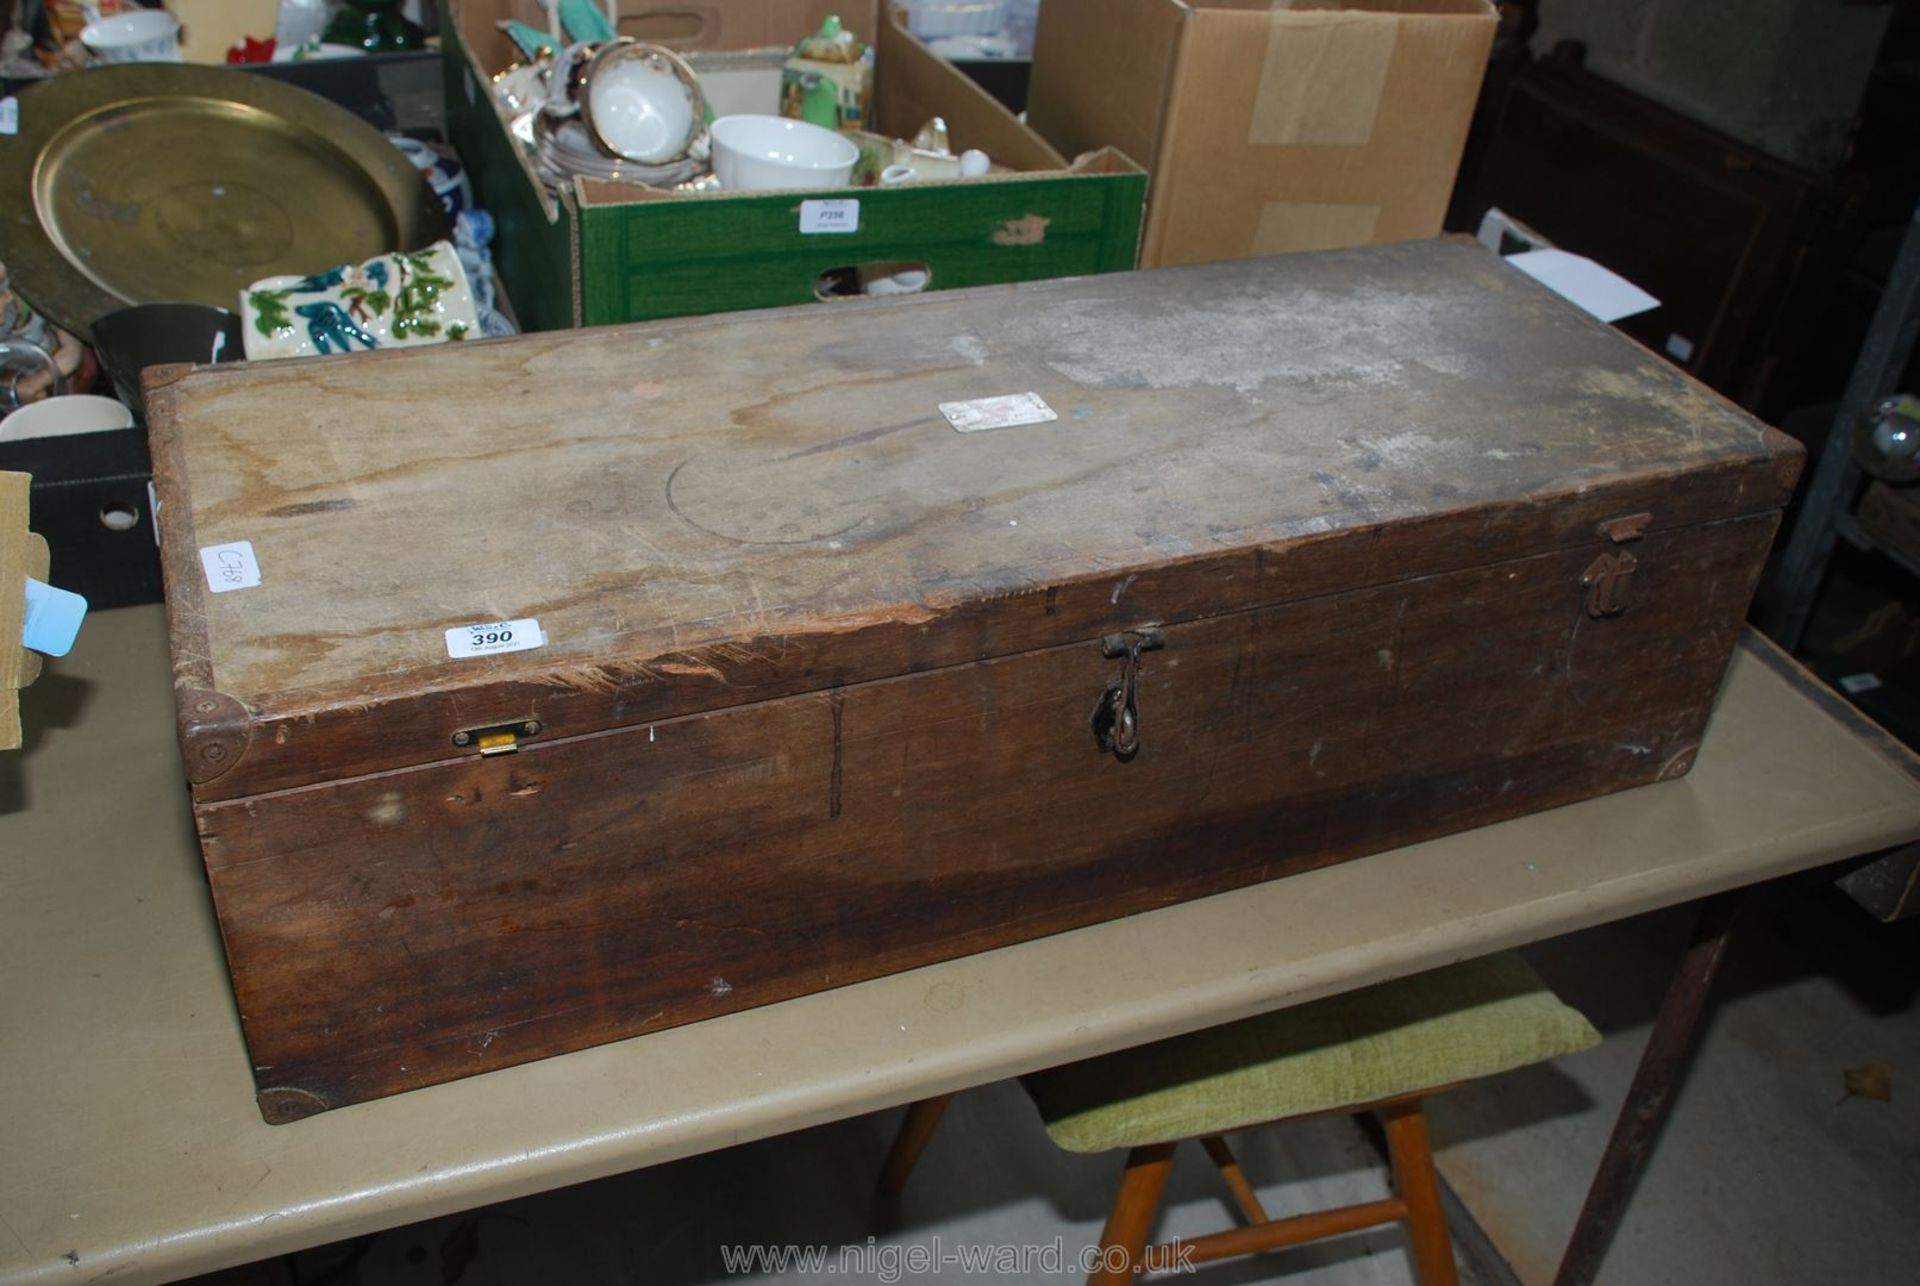 Carpenters tool box containing various saws, planes, mallets, drills etc. - Image 3 of 4